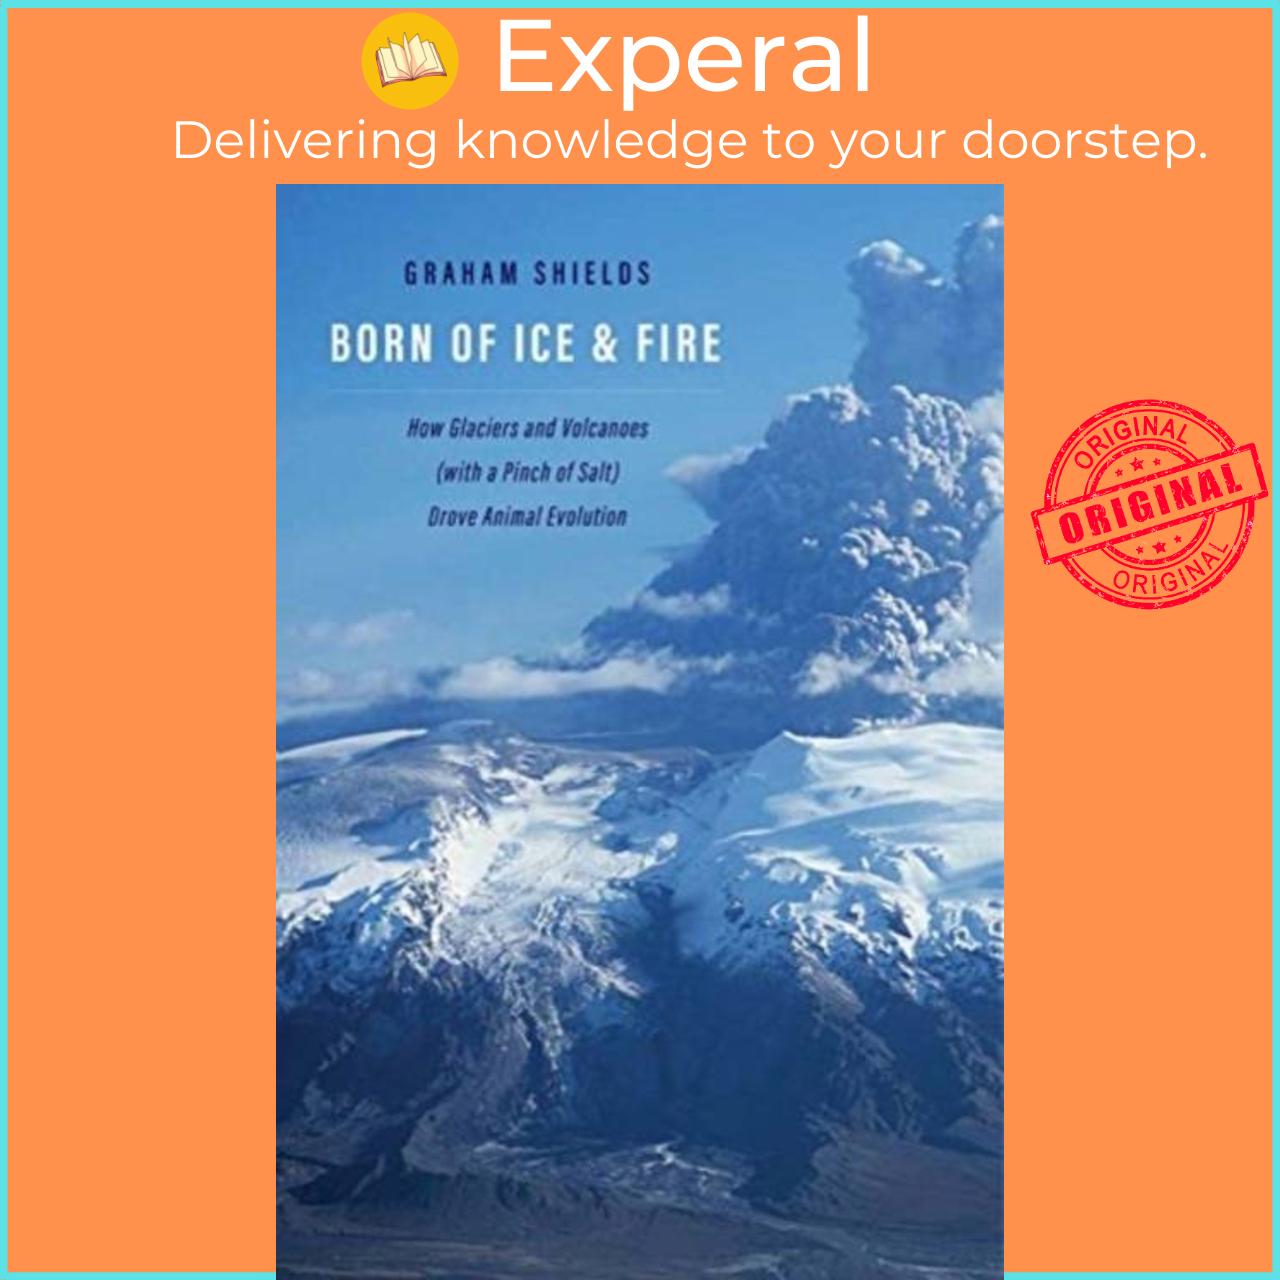 Sách - Born of Ice and Fire - How Glaciers and Volcanoes (with a Pinch of Salt by Graham Shields (UK edition, hardcover)